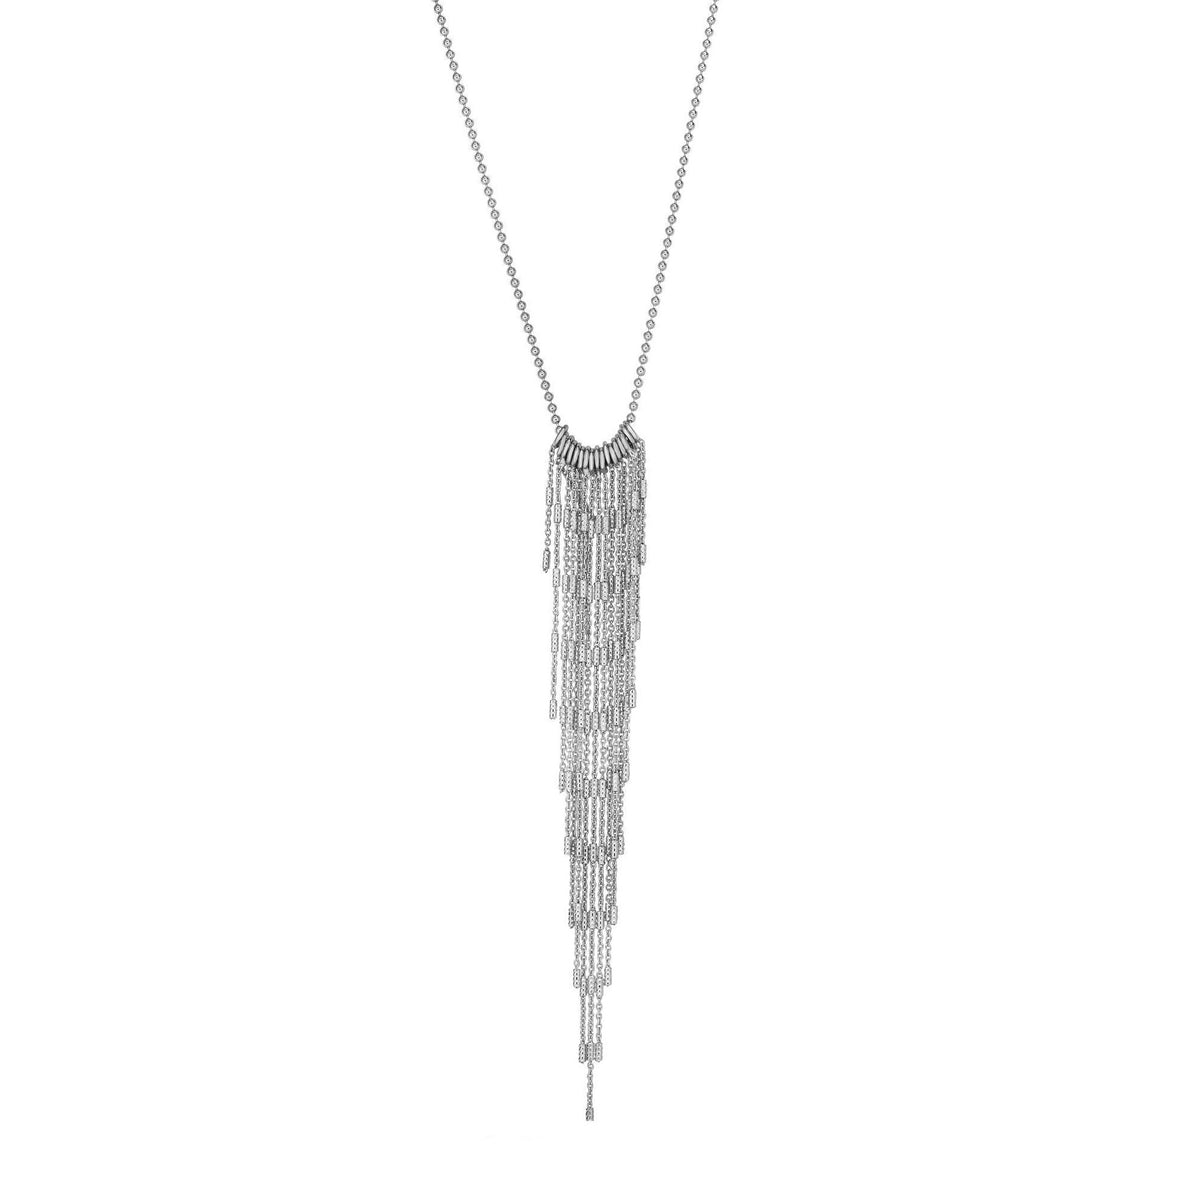 Sterling Silver Hanging Tassel Necklace, 17" fine designer jewelry for men and women